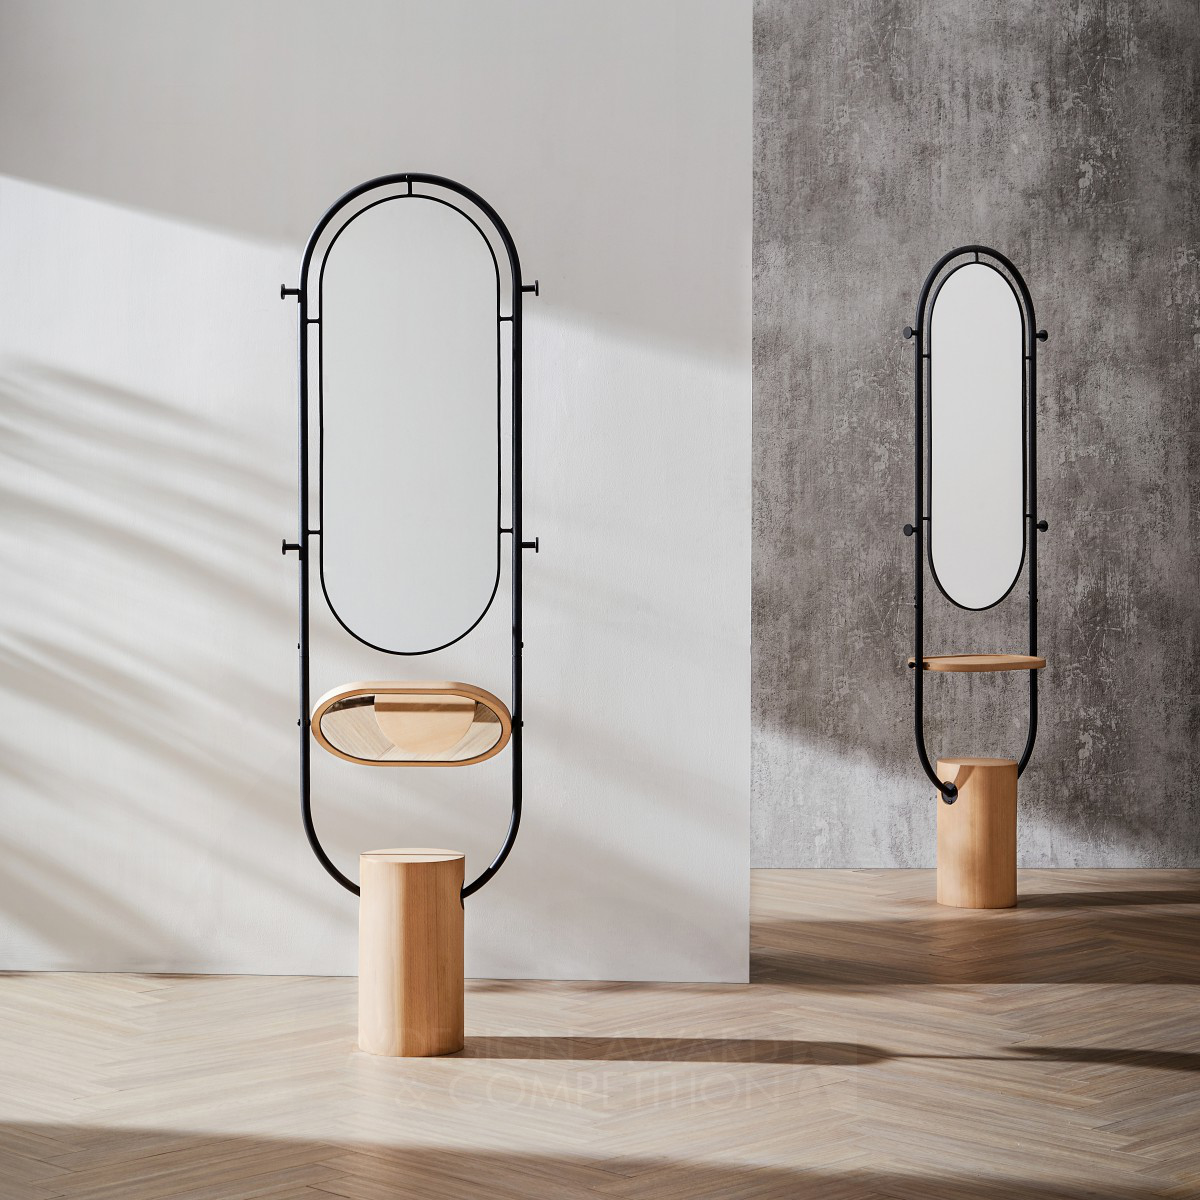 Multifunctional Mirror: A One-Stop Solution for Small Spaces